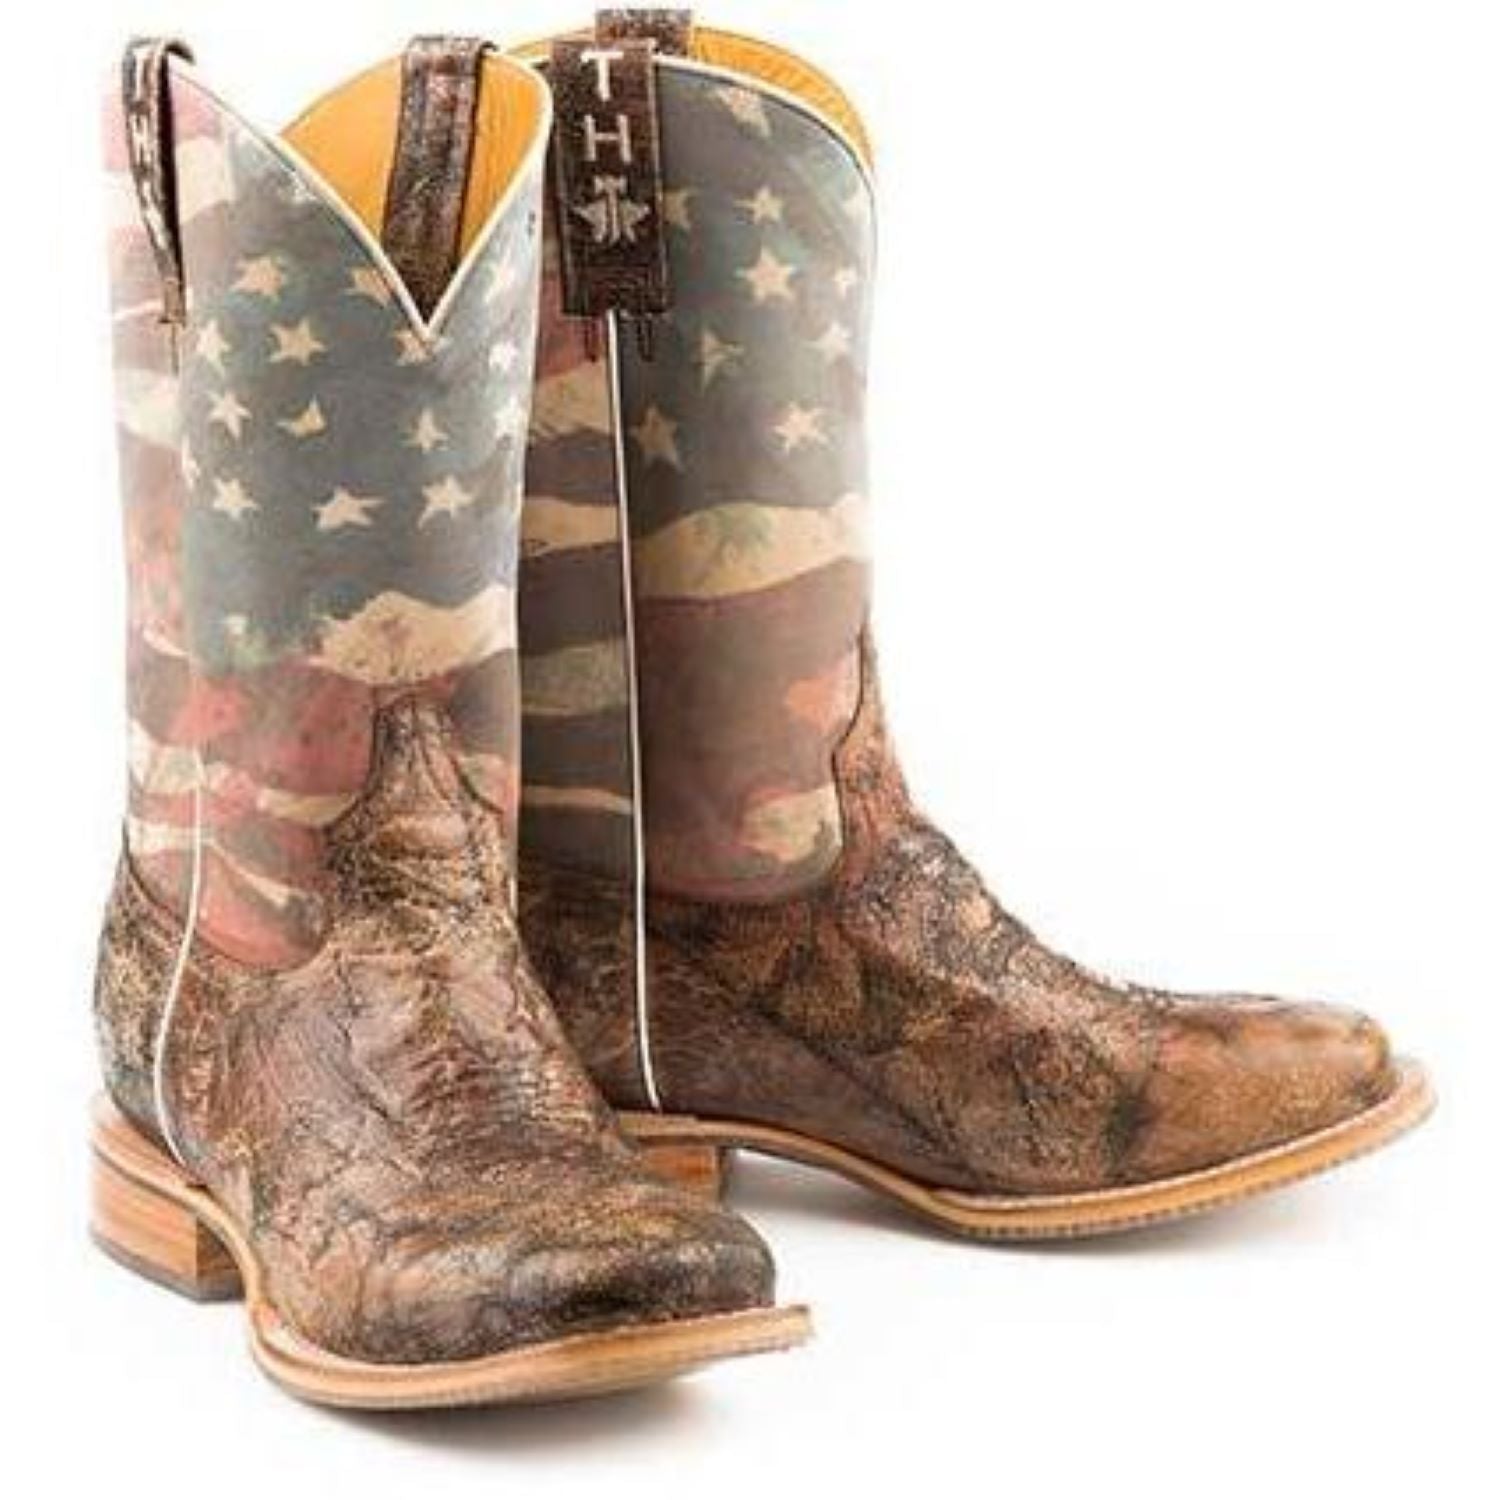 Men’s Tin Haul Land Of The Free Boots With Presidential Sole Handcrafted Brown - yeehawcowboy